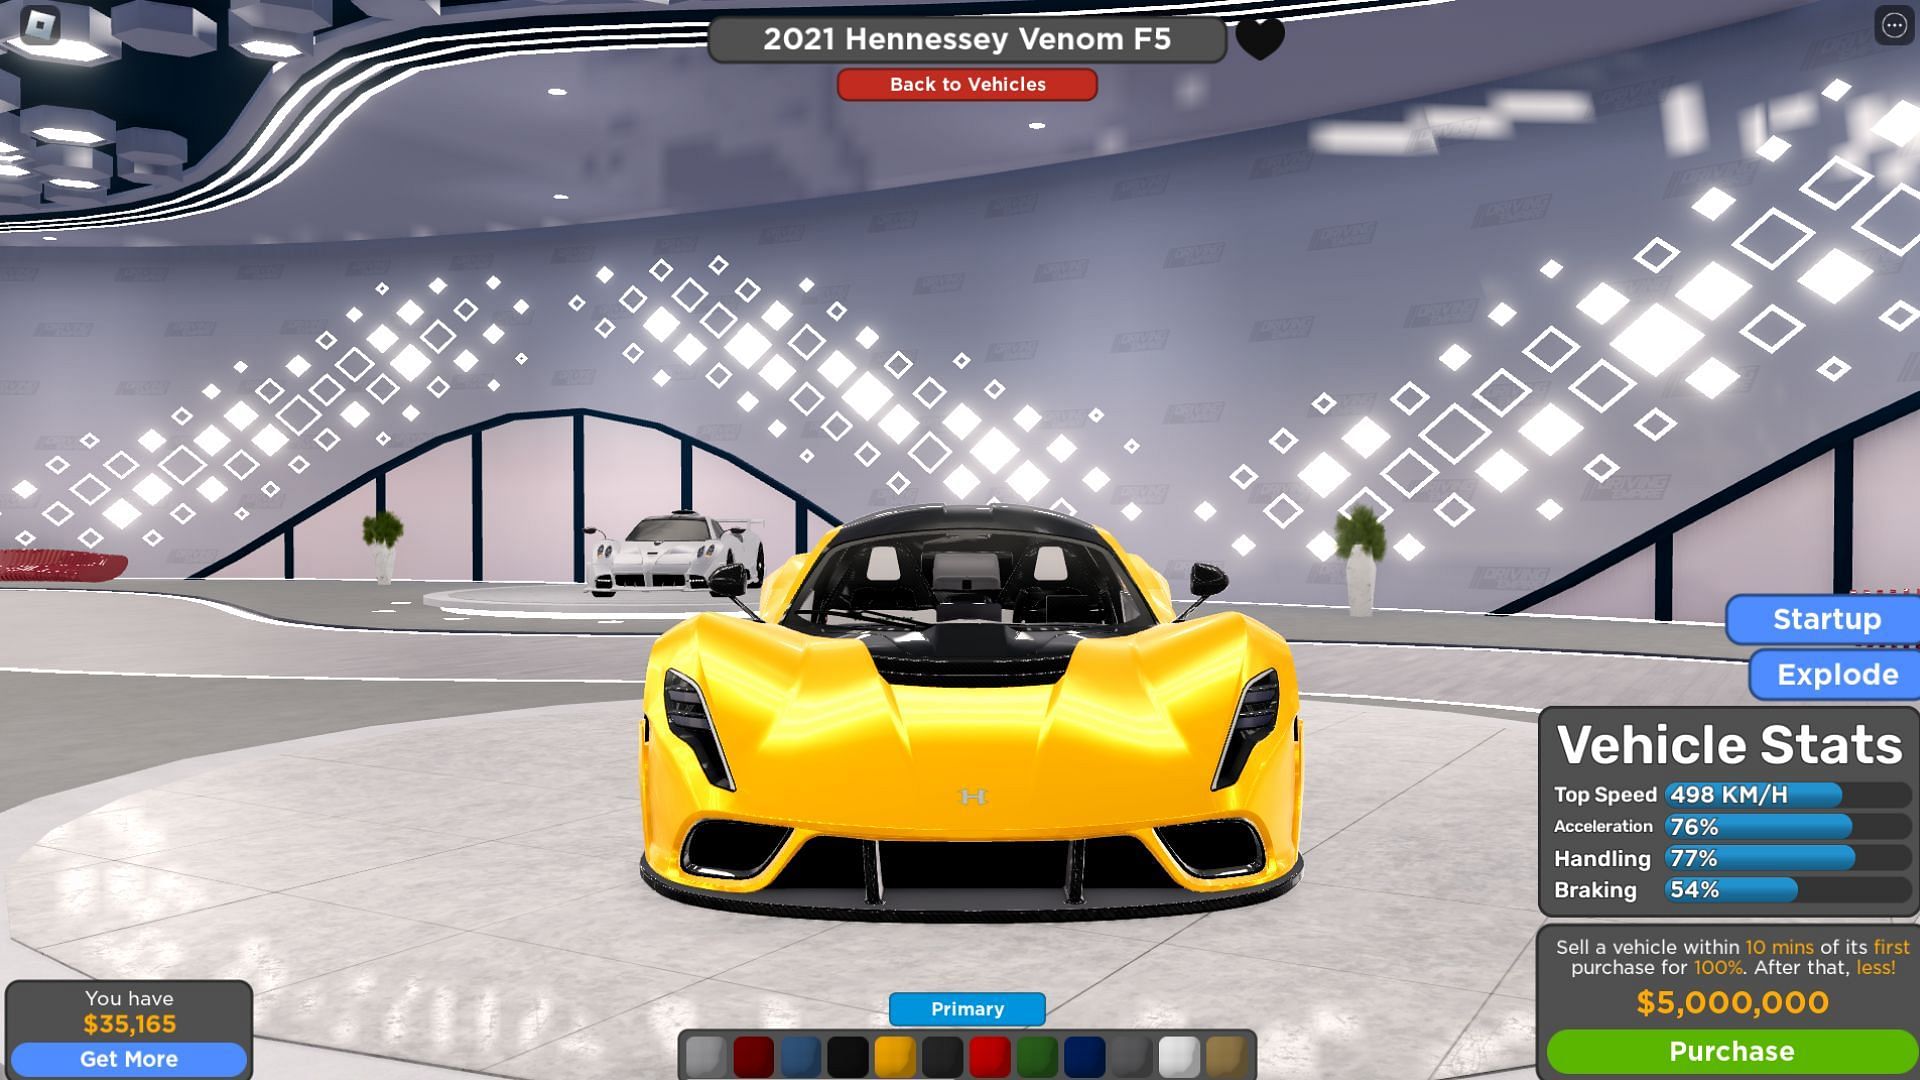 Venom F5 is one of the best options in the game (Image via Roblox)